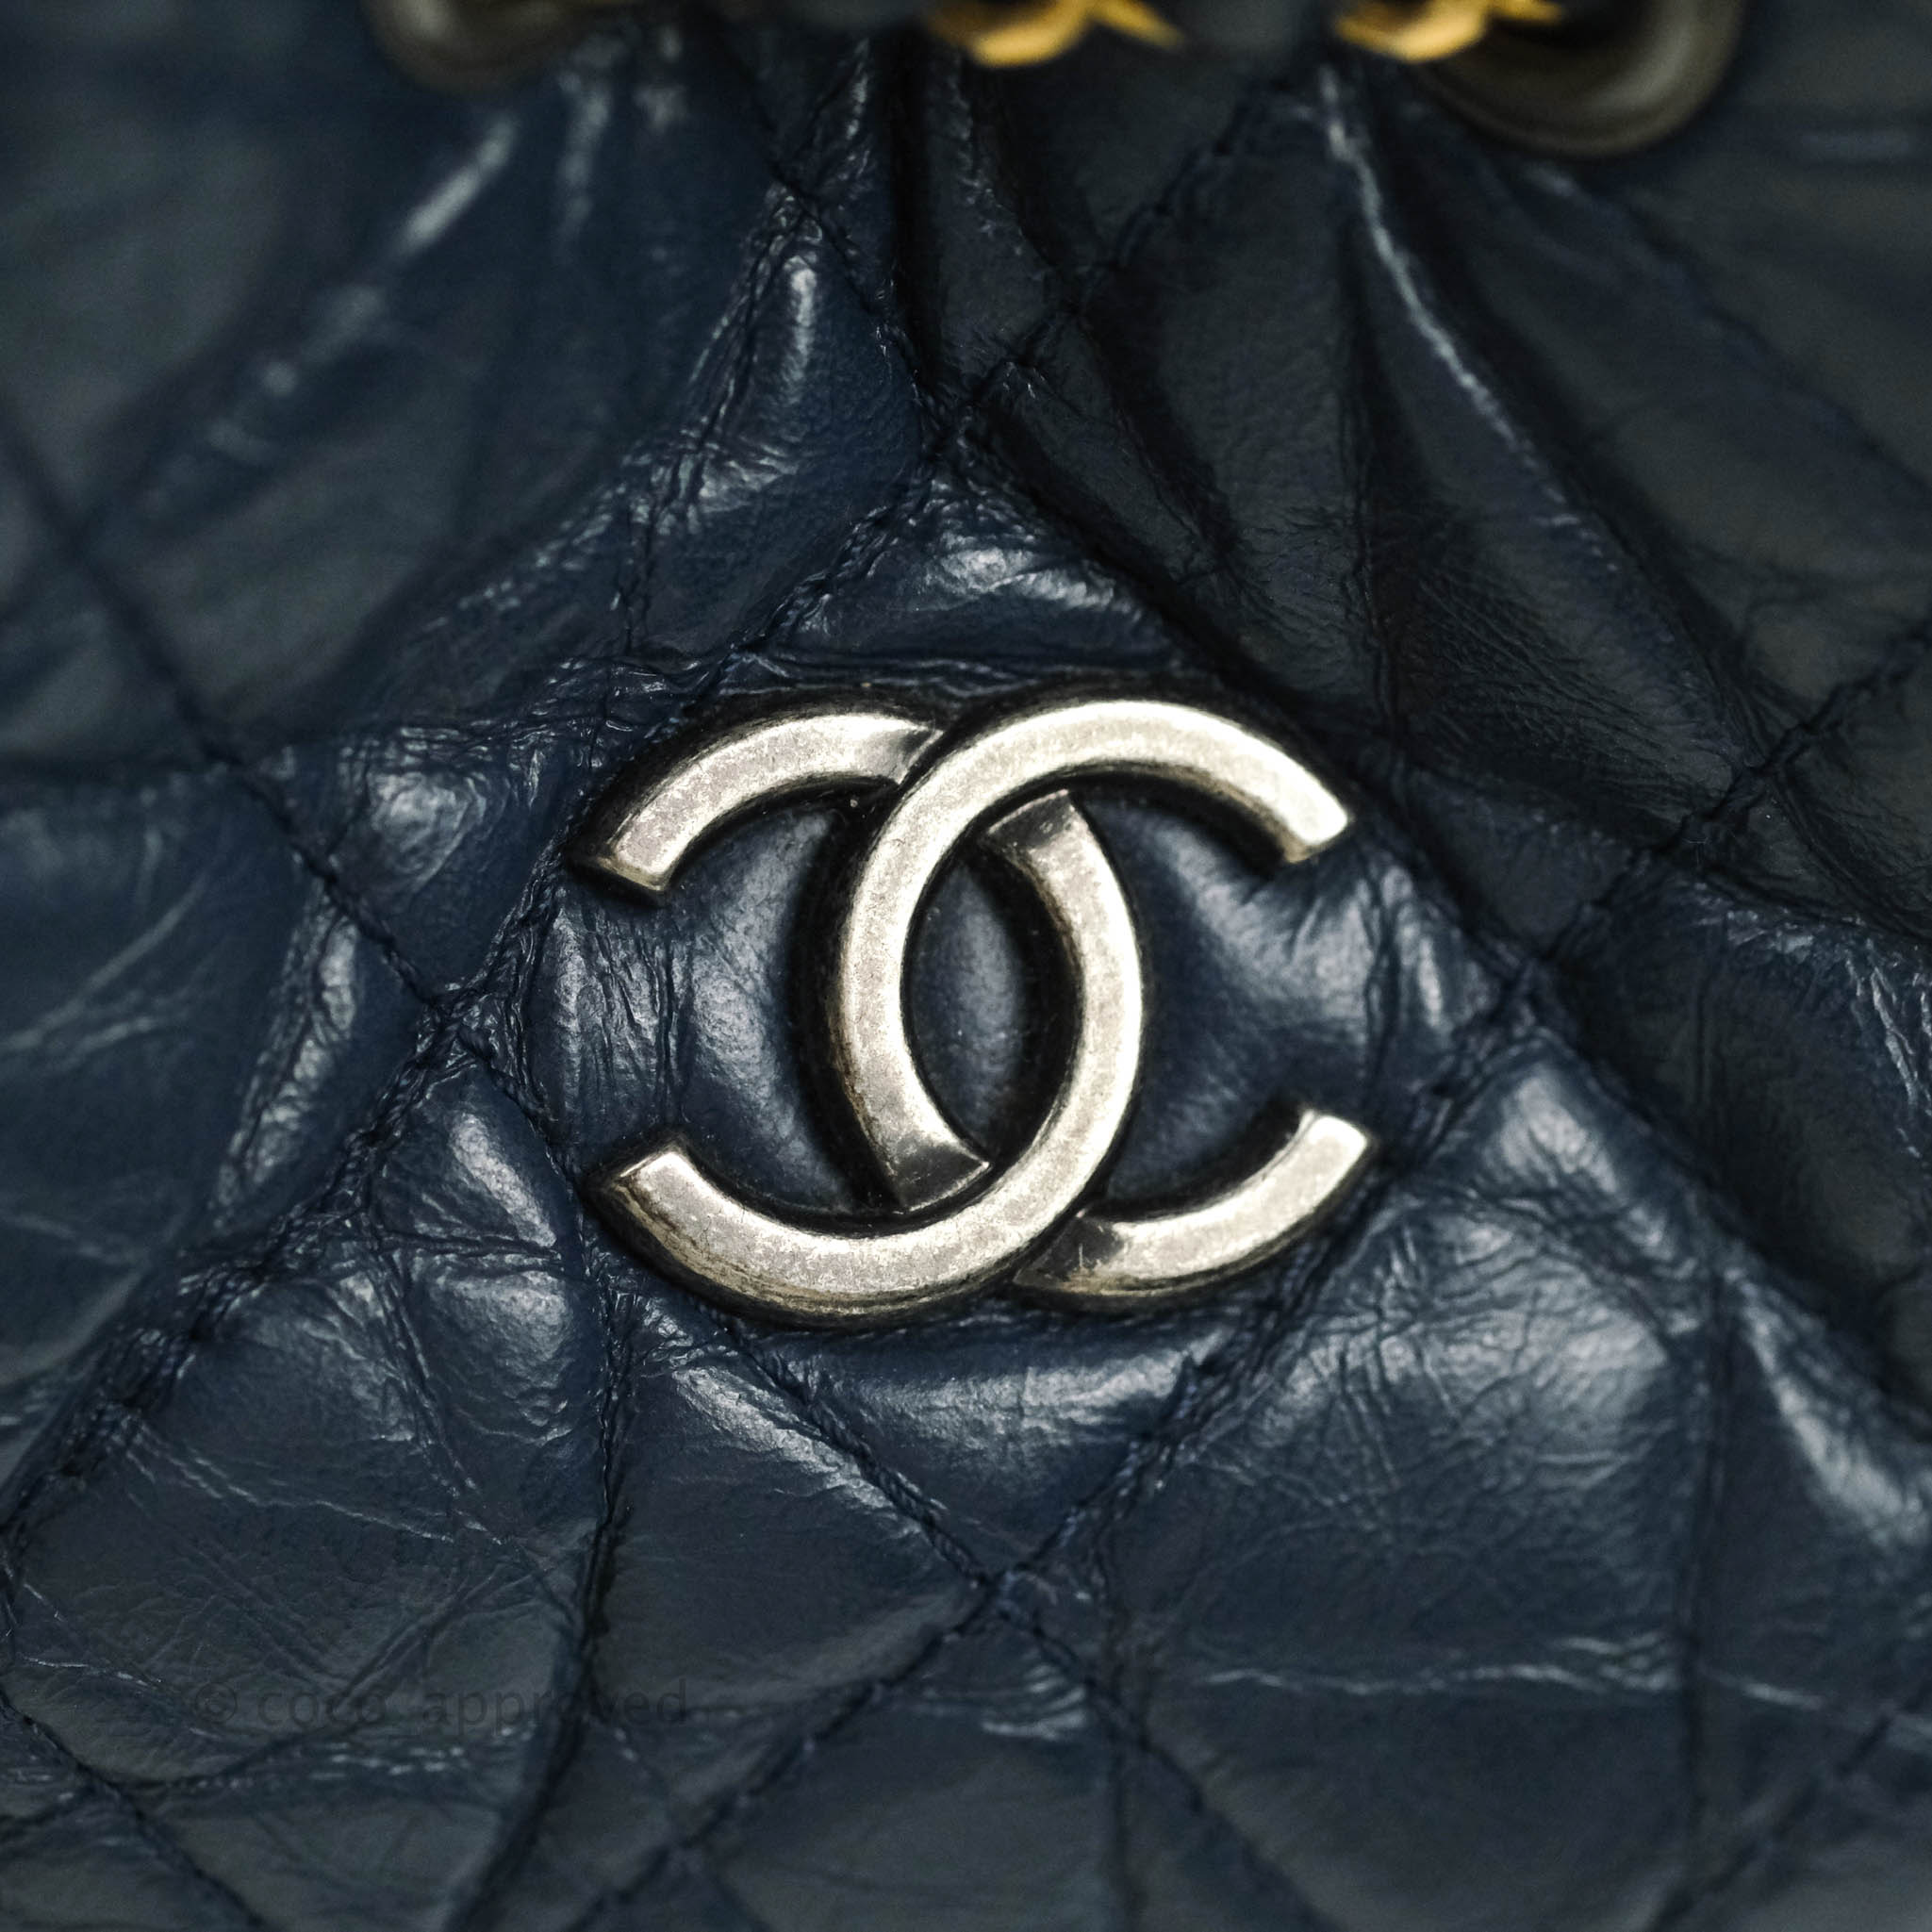 Chanel Gabrielle Backpack Black Aged Calfskin Small Navy Black – Coco  Approved Studio